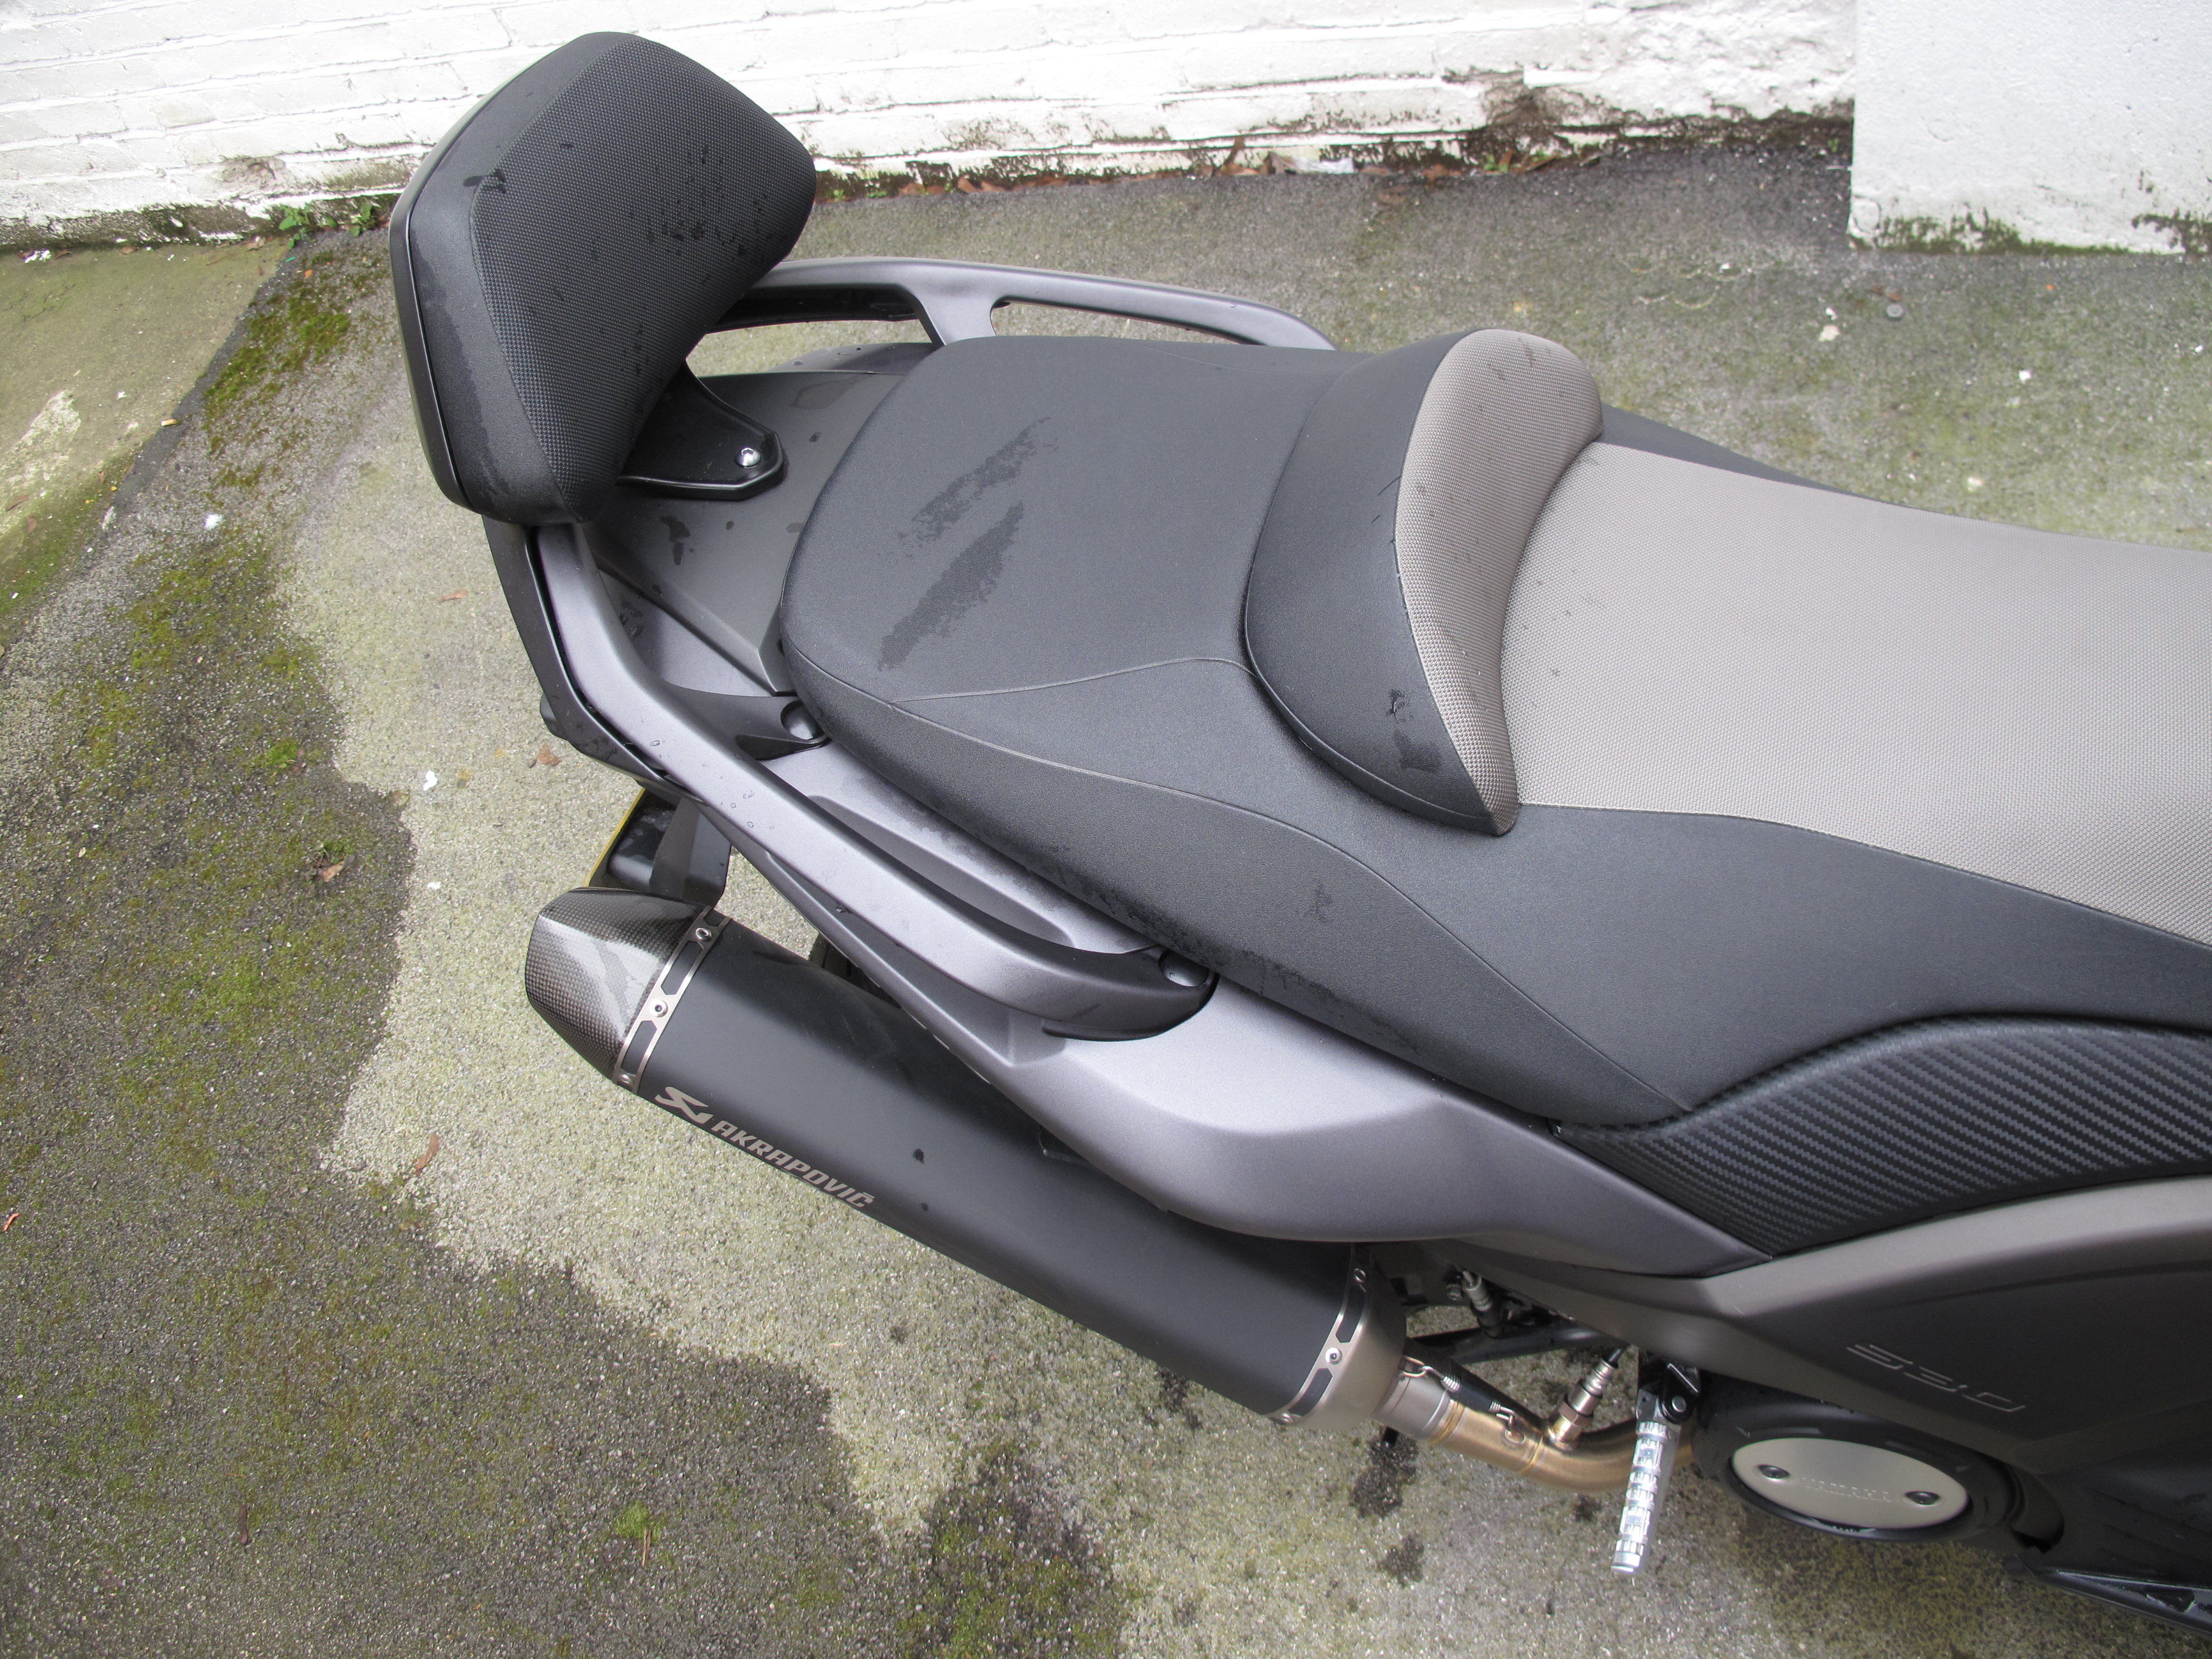 First Ride: 2013 Yamaha TMAX Black Max 530 review